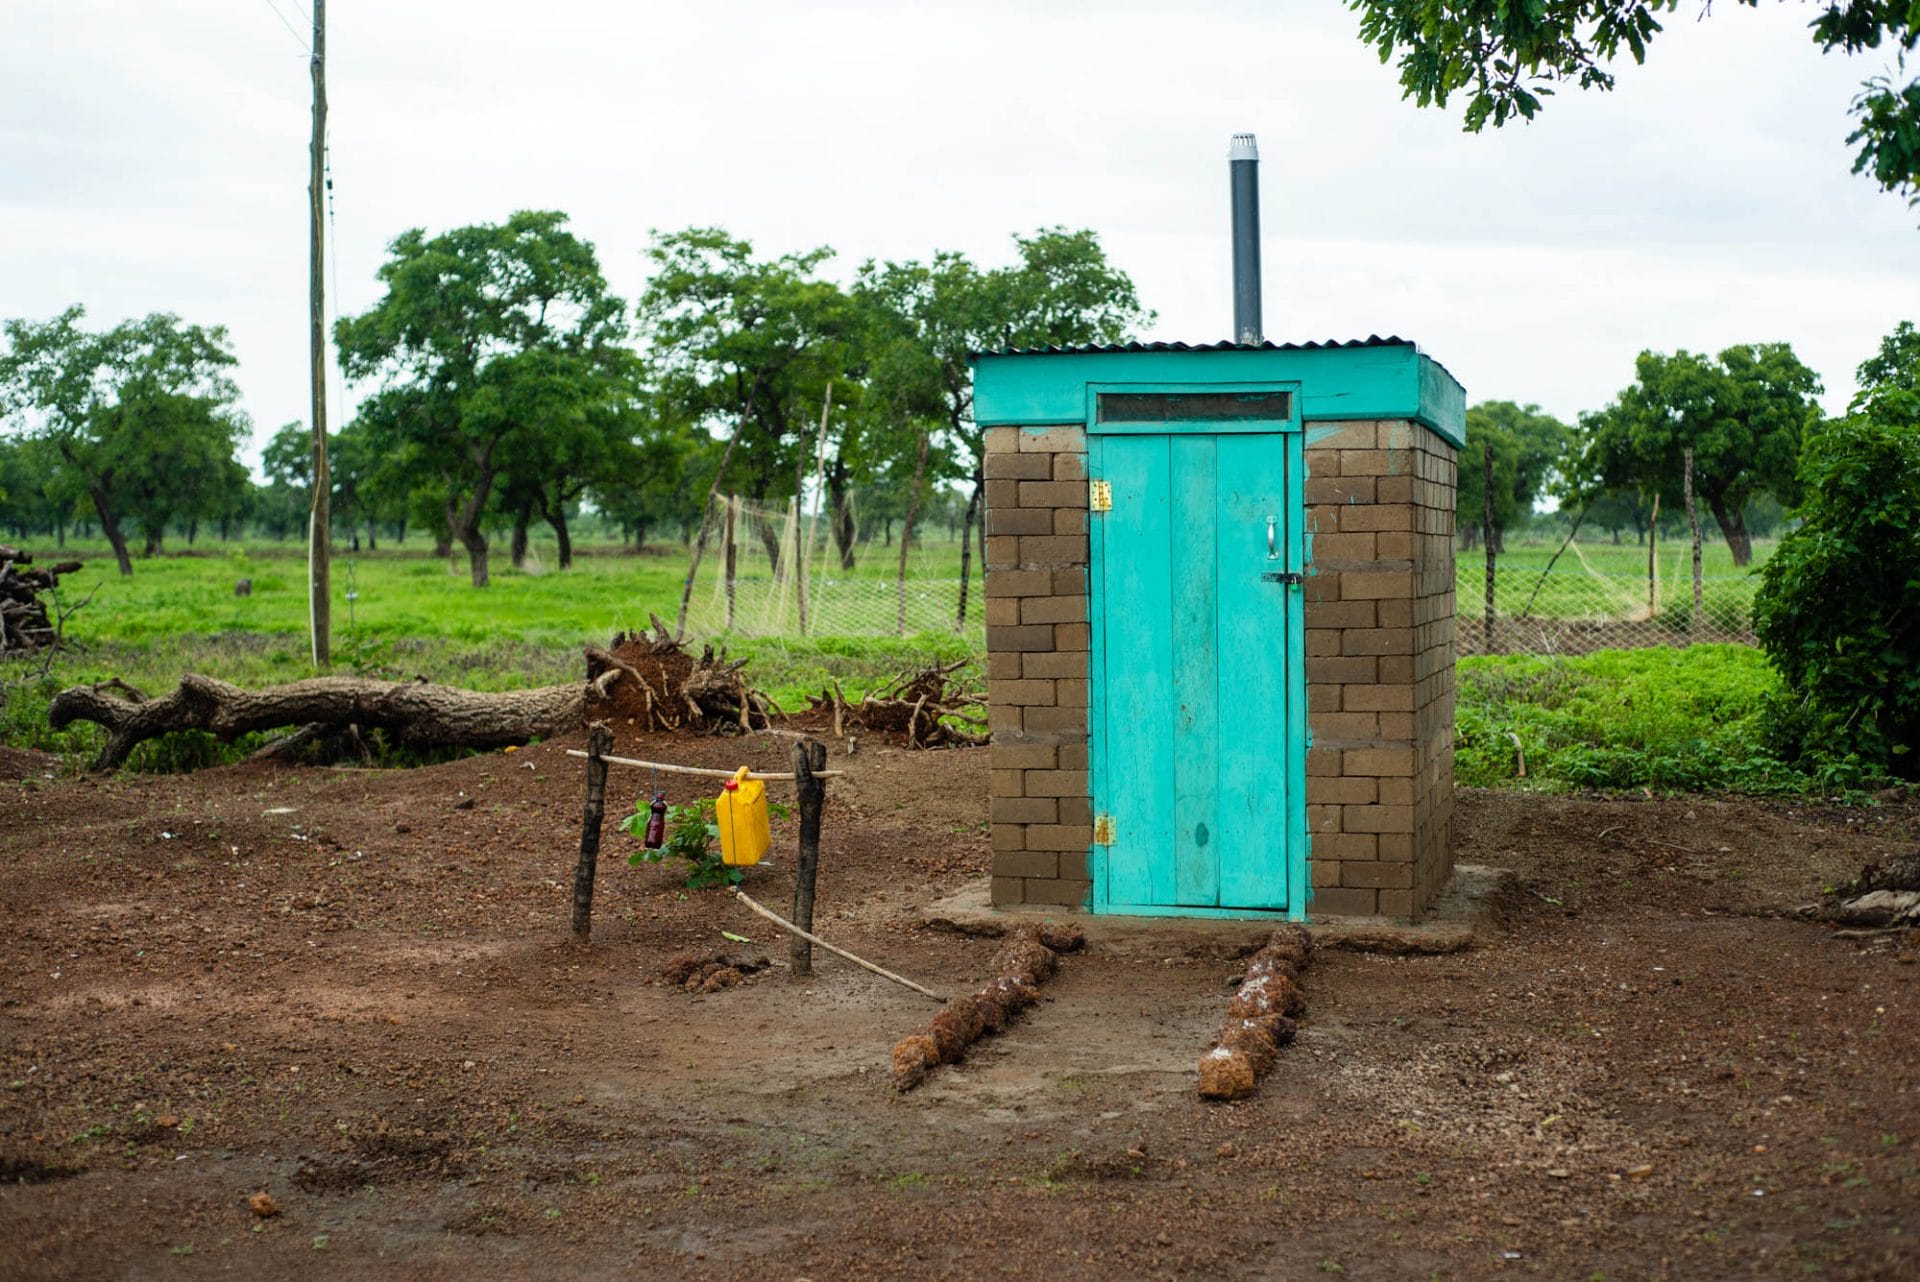 A household latrine constructed with interlocking blocks with an installed Digni-Loo